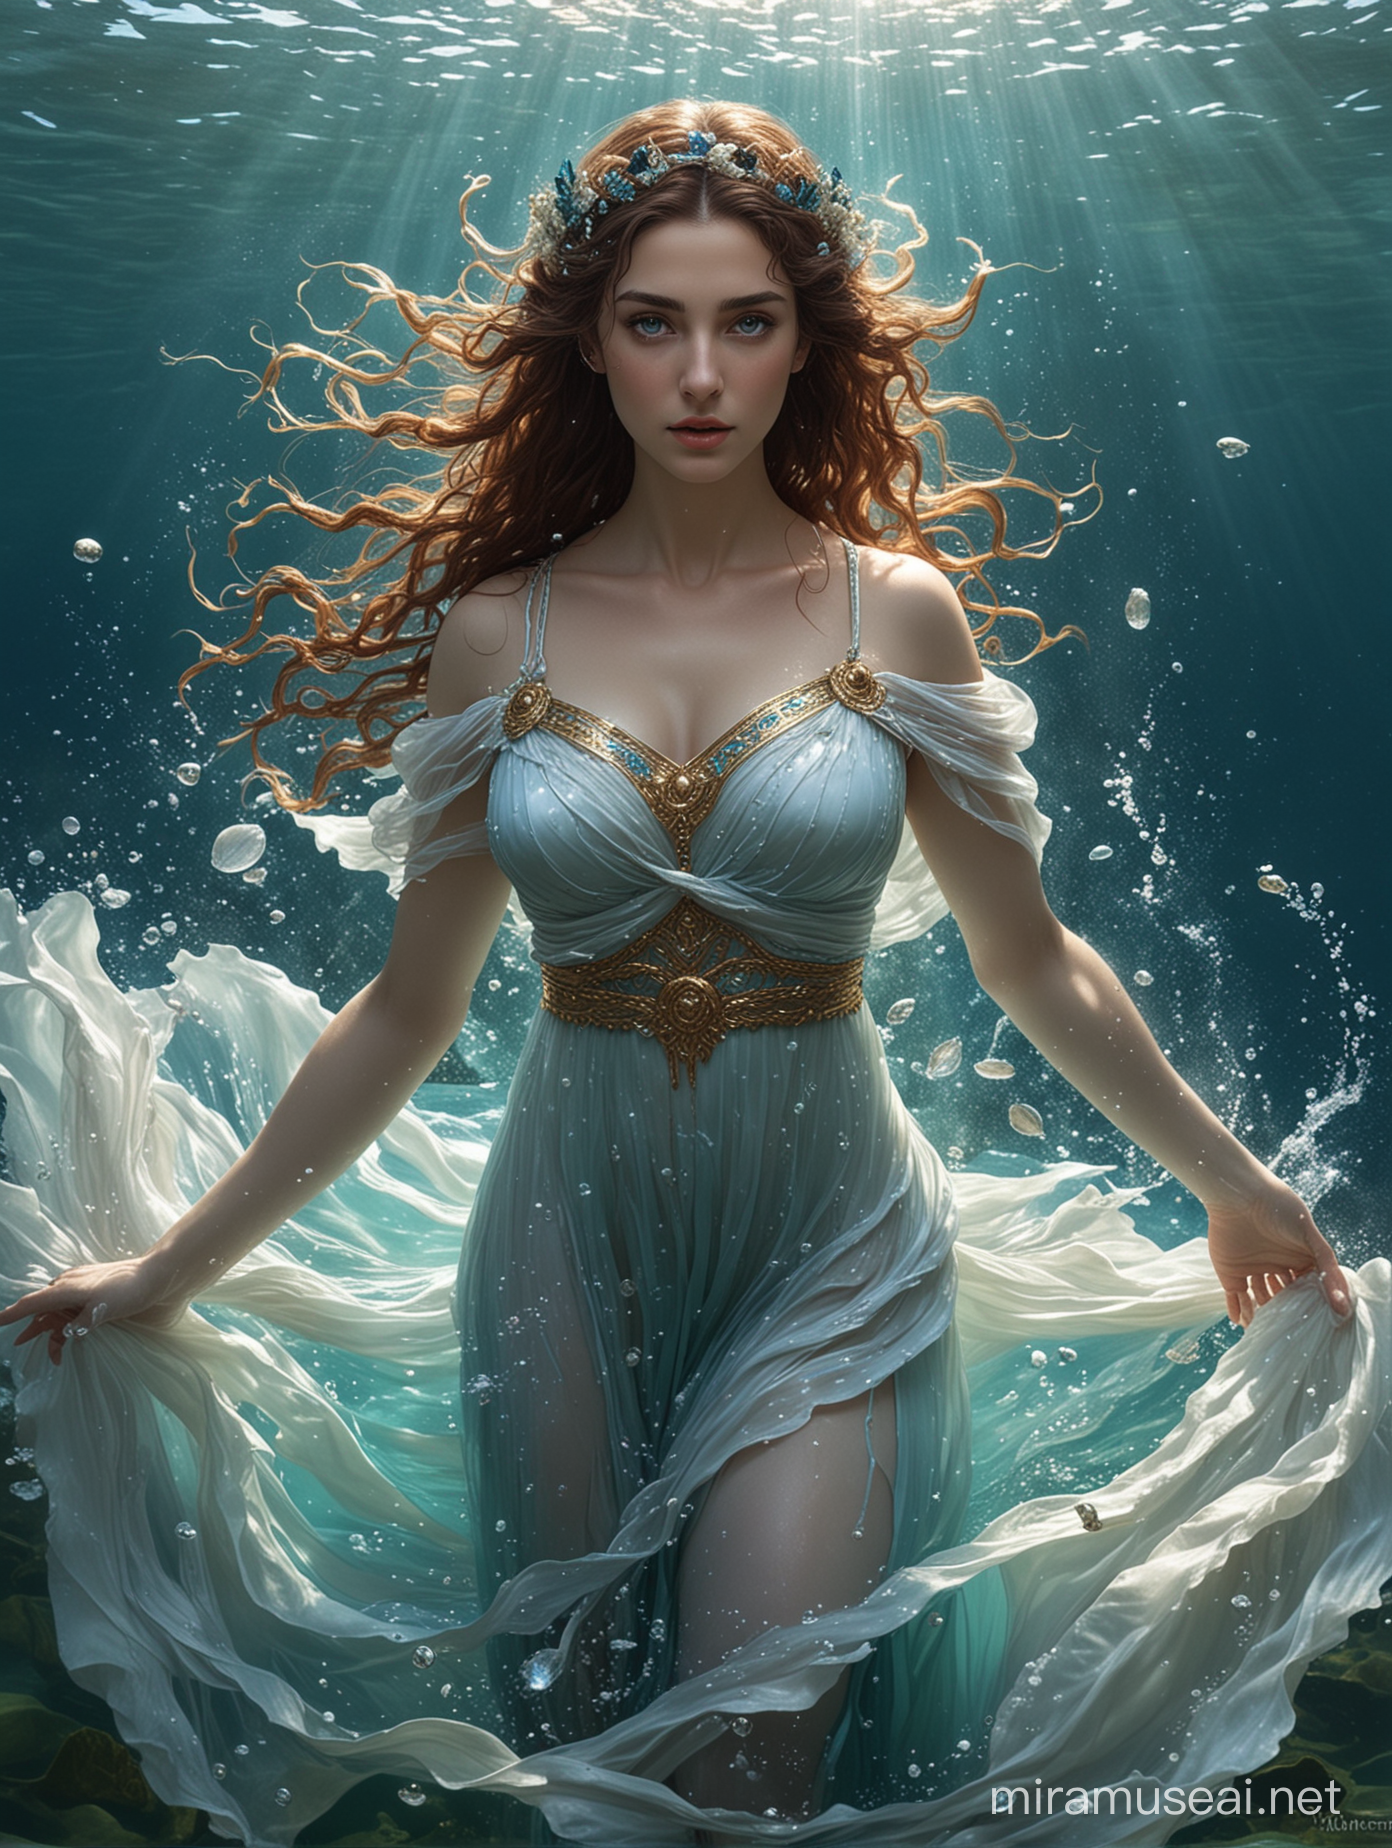 A masterpieced of Kimiya Hosseini as Leucothea, Greek goddess of the sea. She is under the sea, and her Greek dress flows ethereally in the water until it mixes with the water until it disappears. She has has blue eyes.